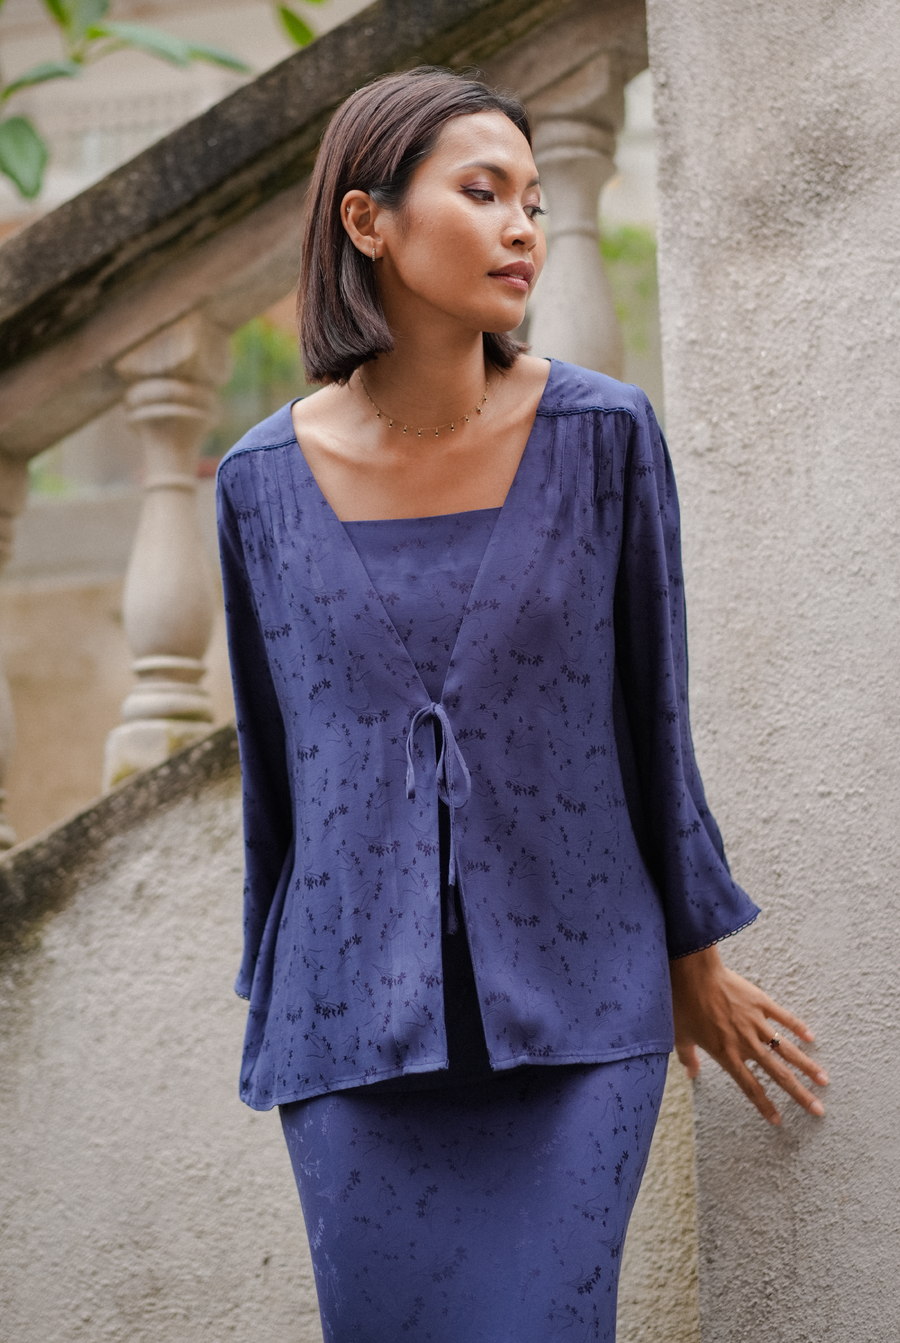 Victoria Jacquard Blouse in Navy